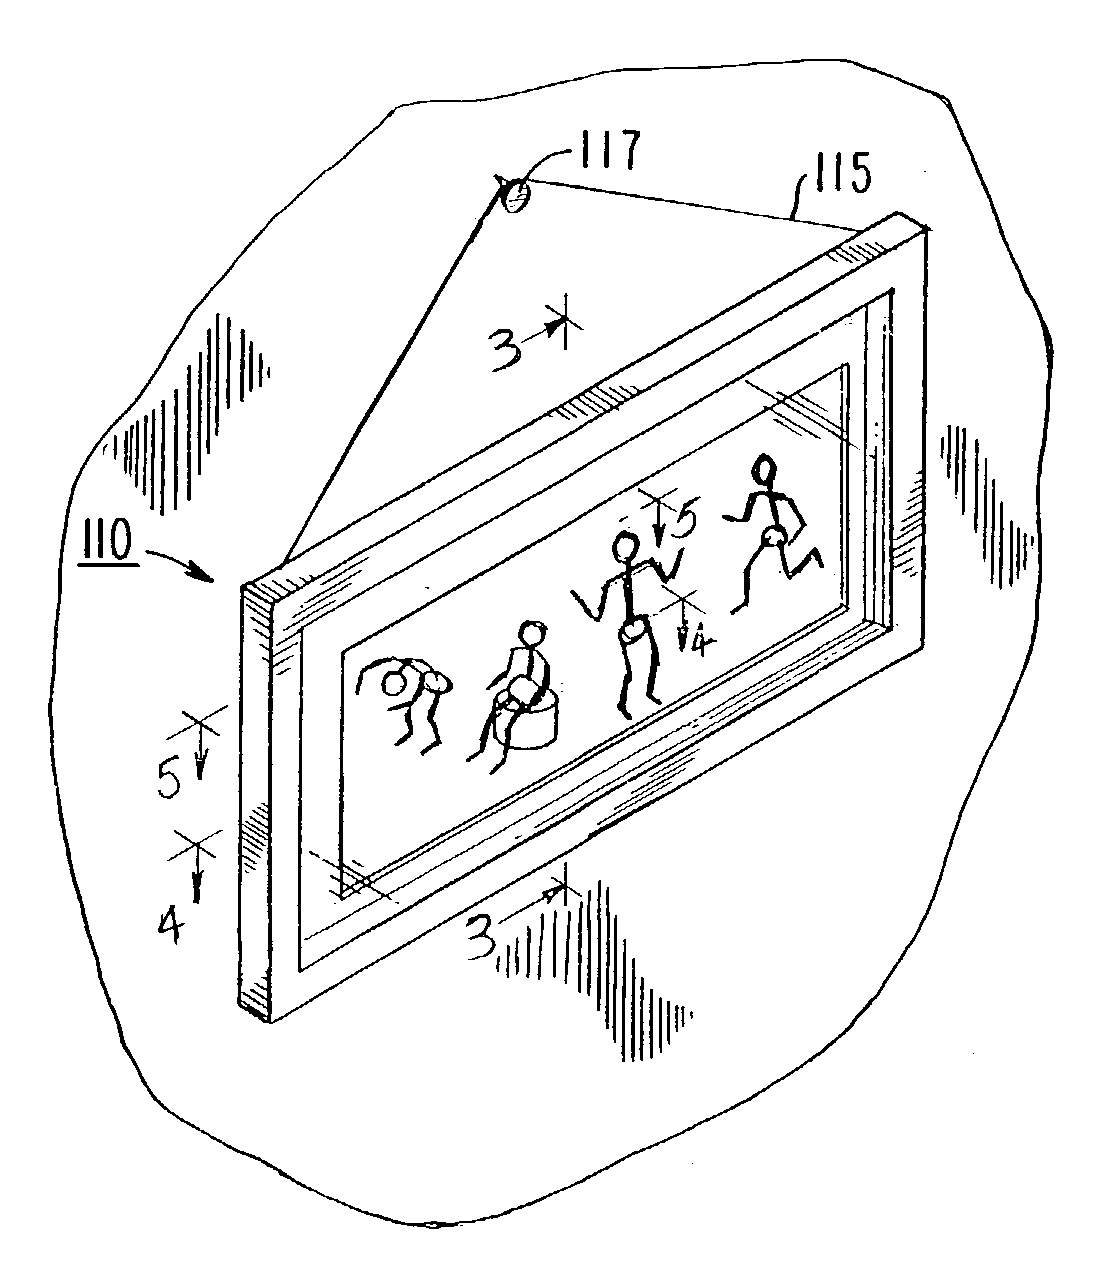 Audio-visual display device for pictorial artwork